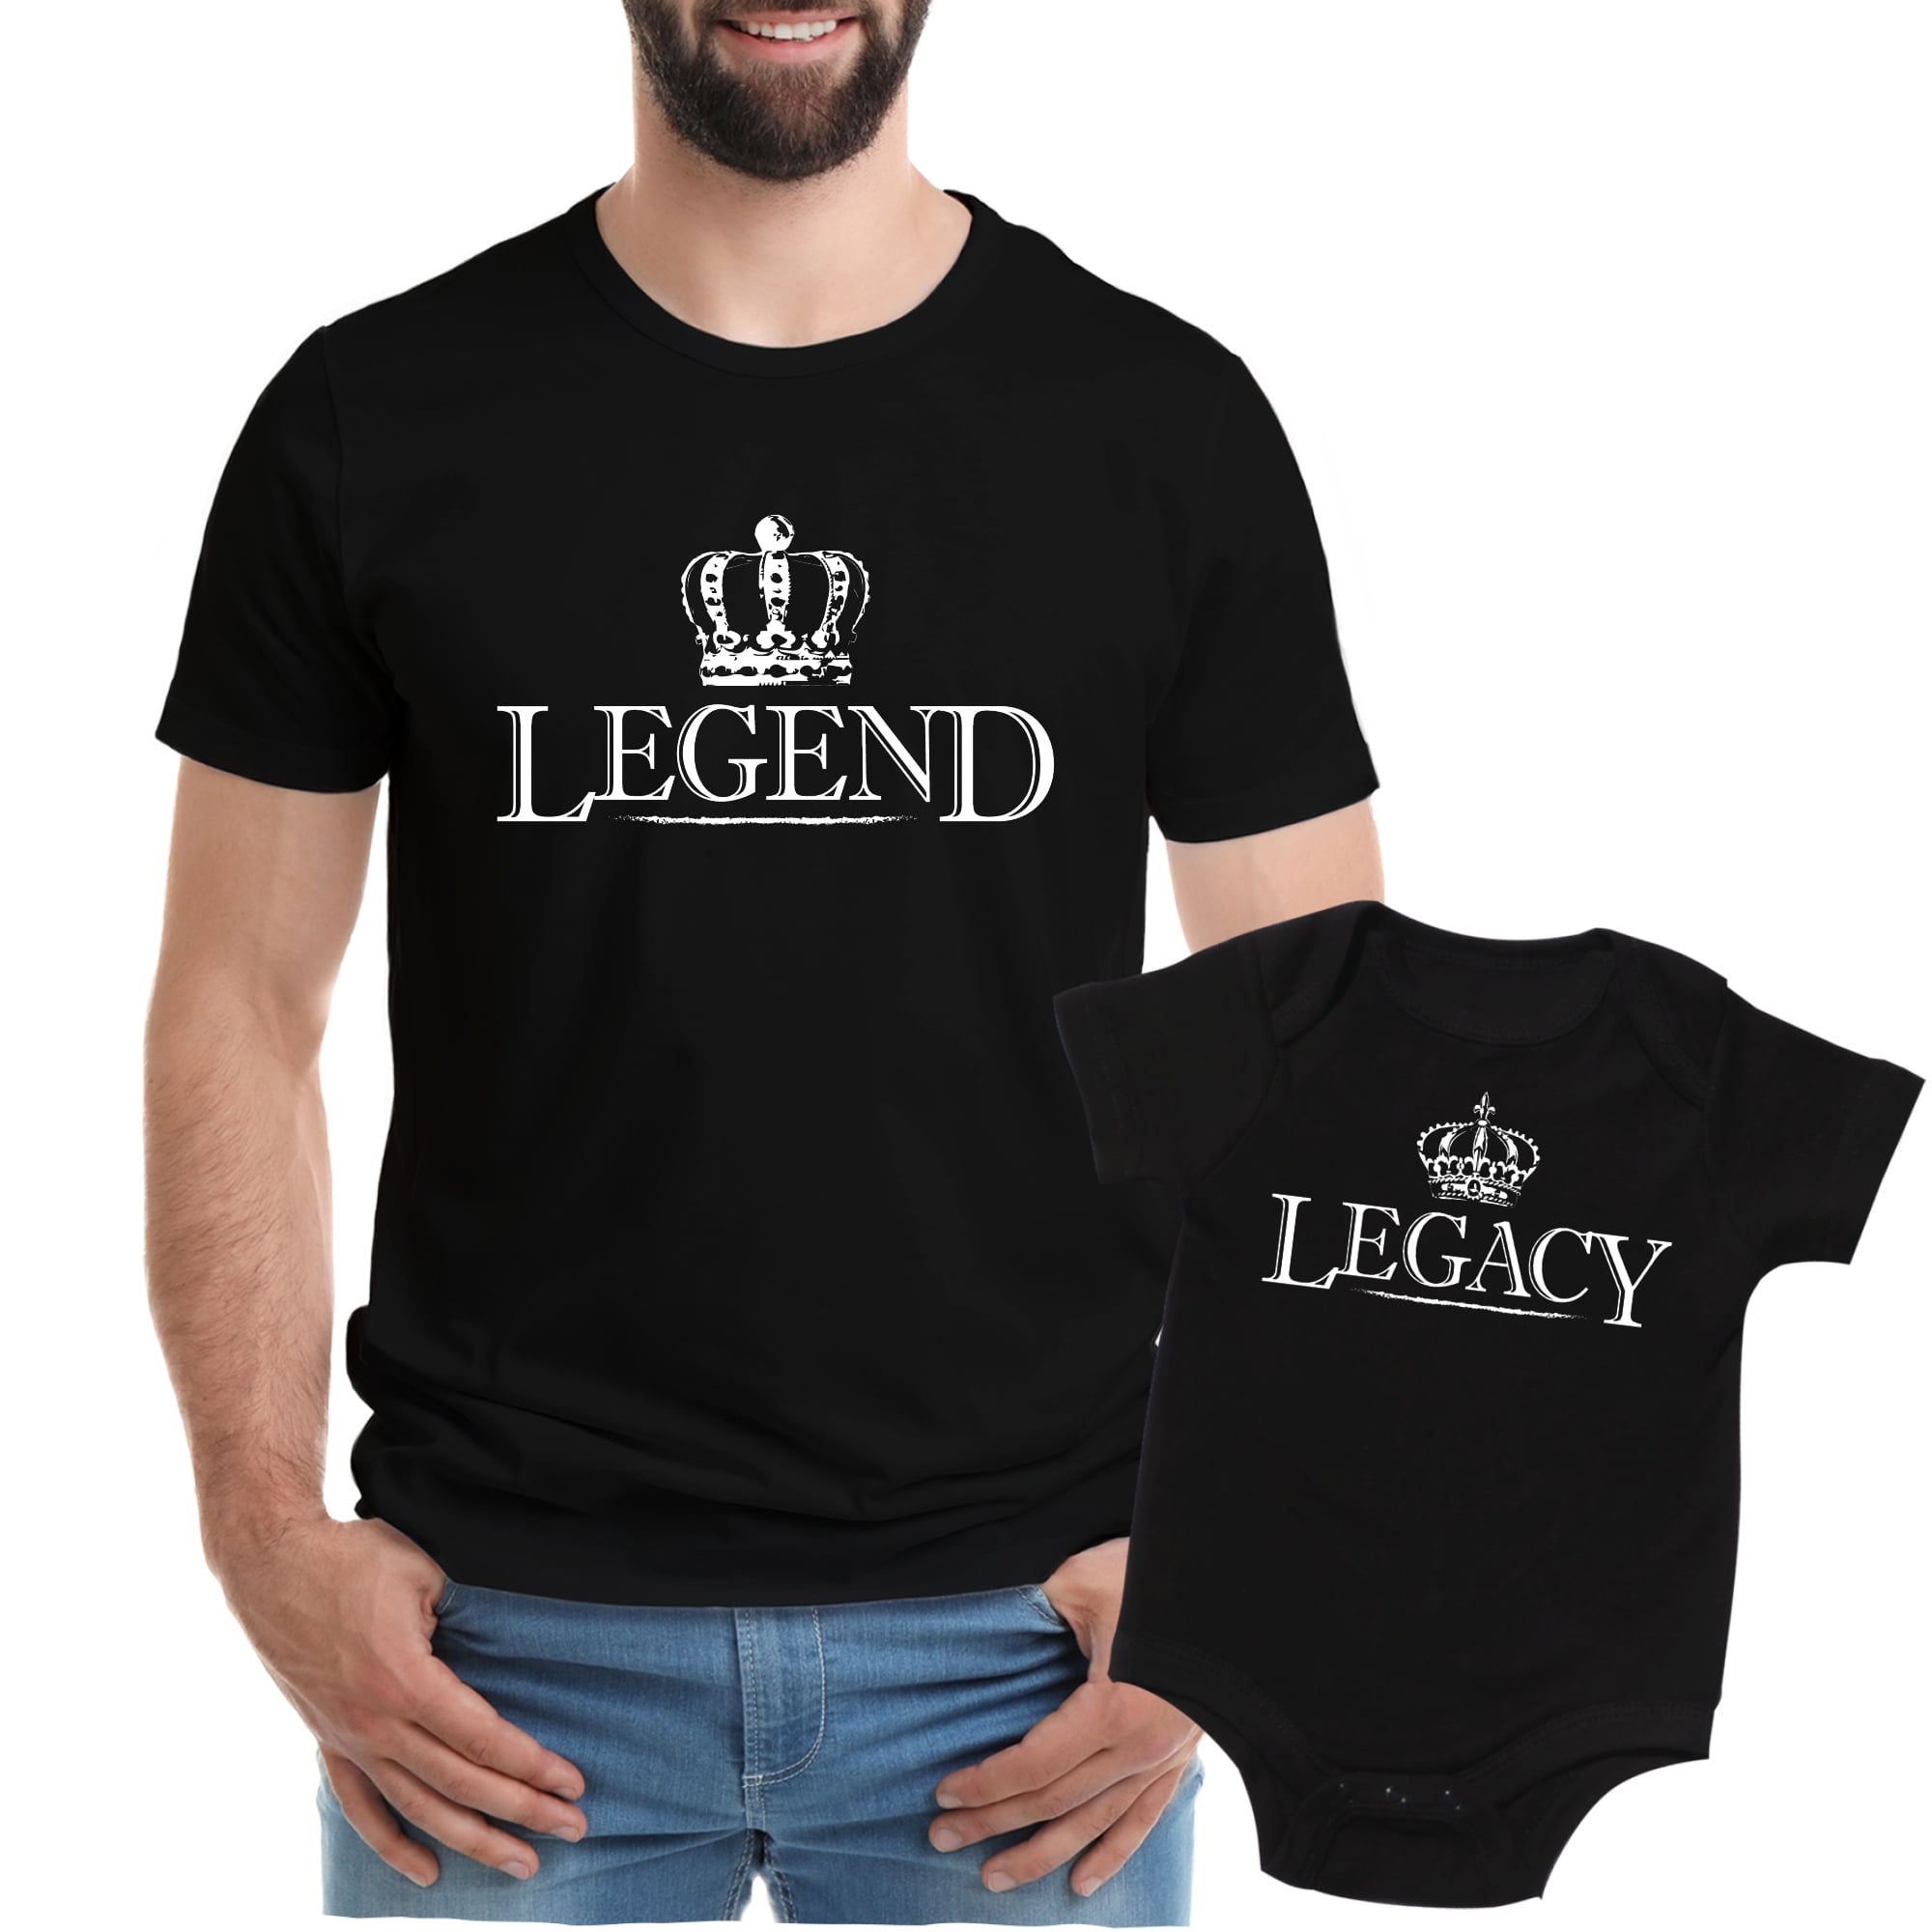 Feisty And Fabulous Father Son Tshirts Matching Father Son Shirts Black Legacy And Legend